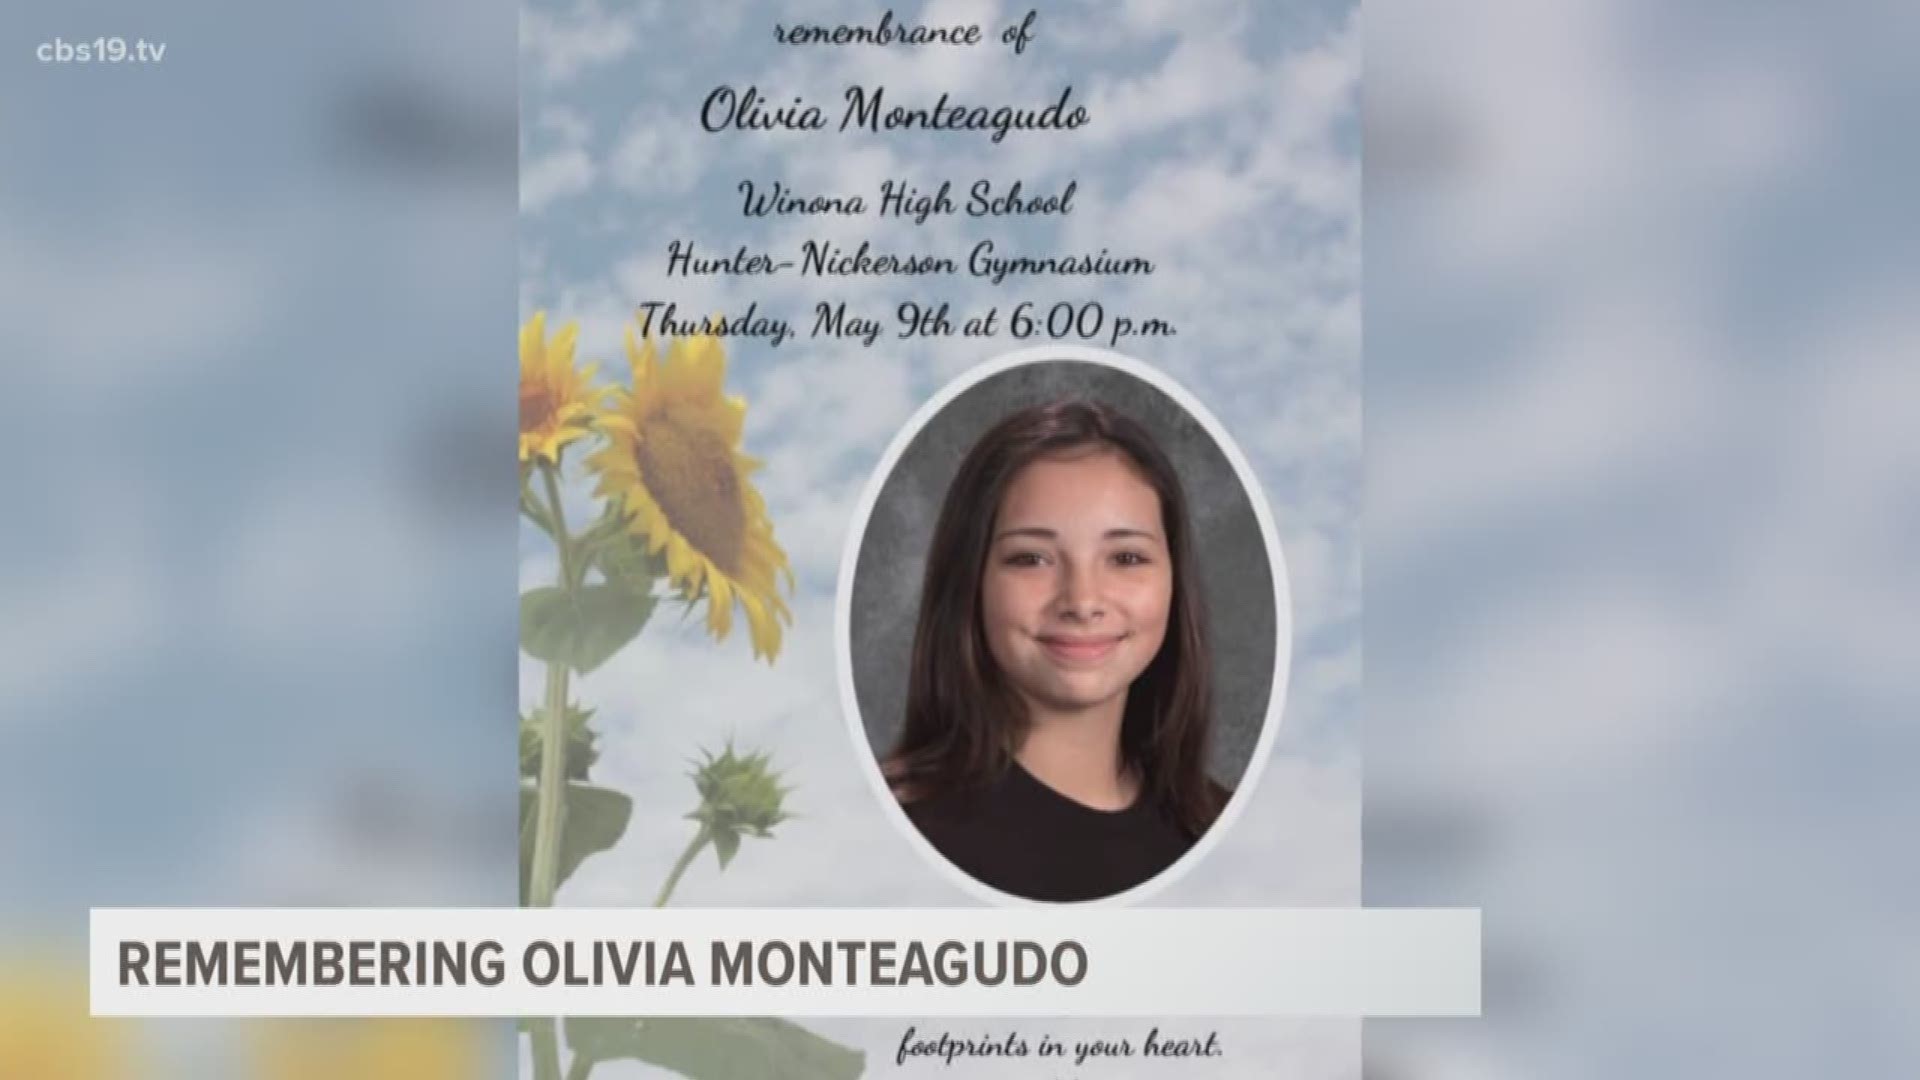 Winona ISD held a memorial service for the 8th grader who was found dead in her home Monday in what investigators are now calling a murder-suicide.